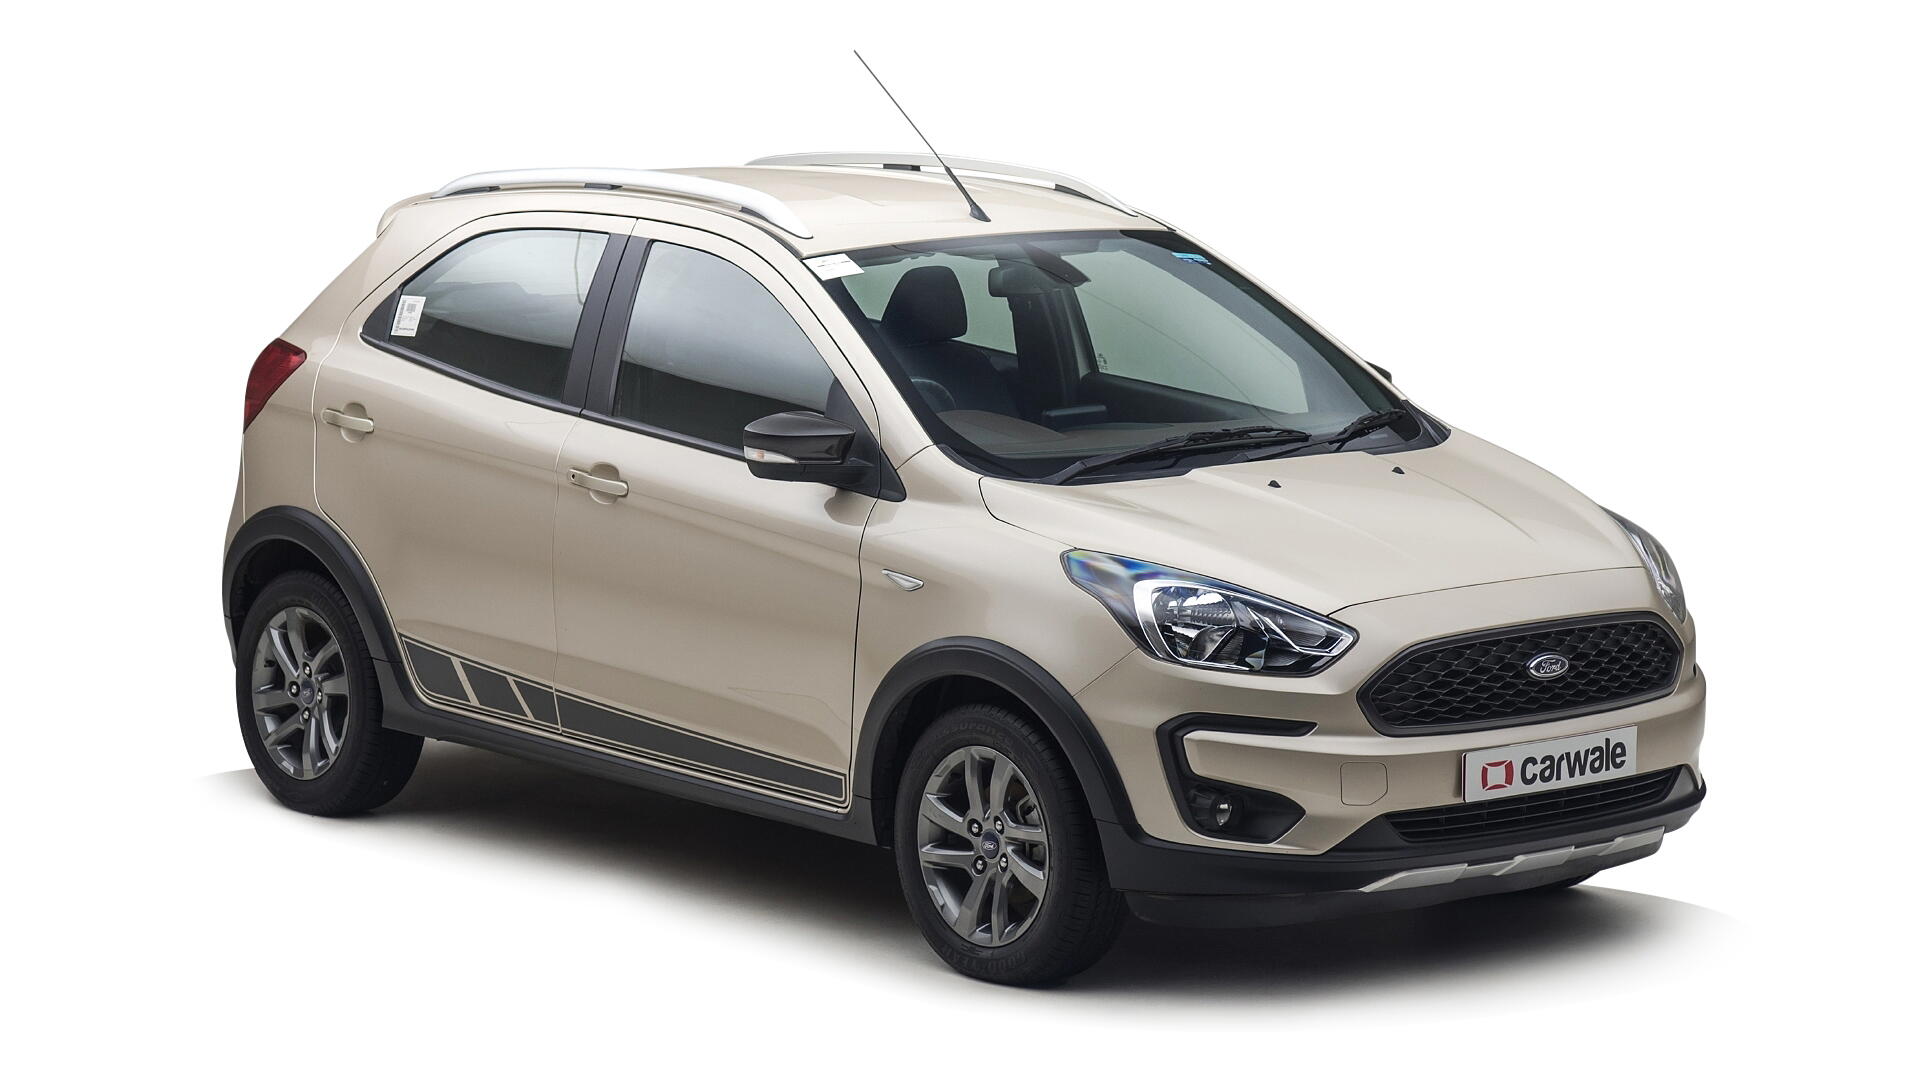 Ford Freestyle Images